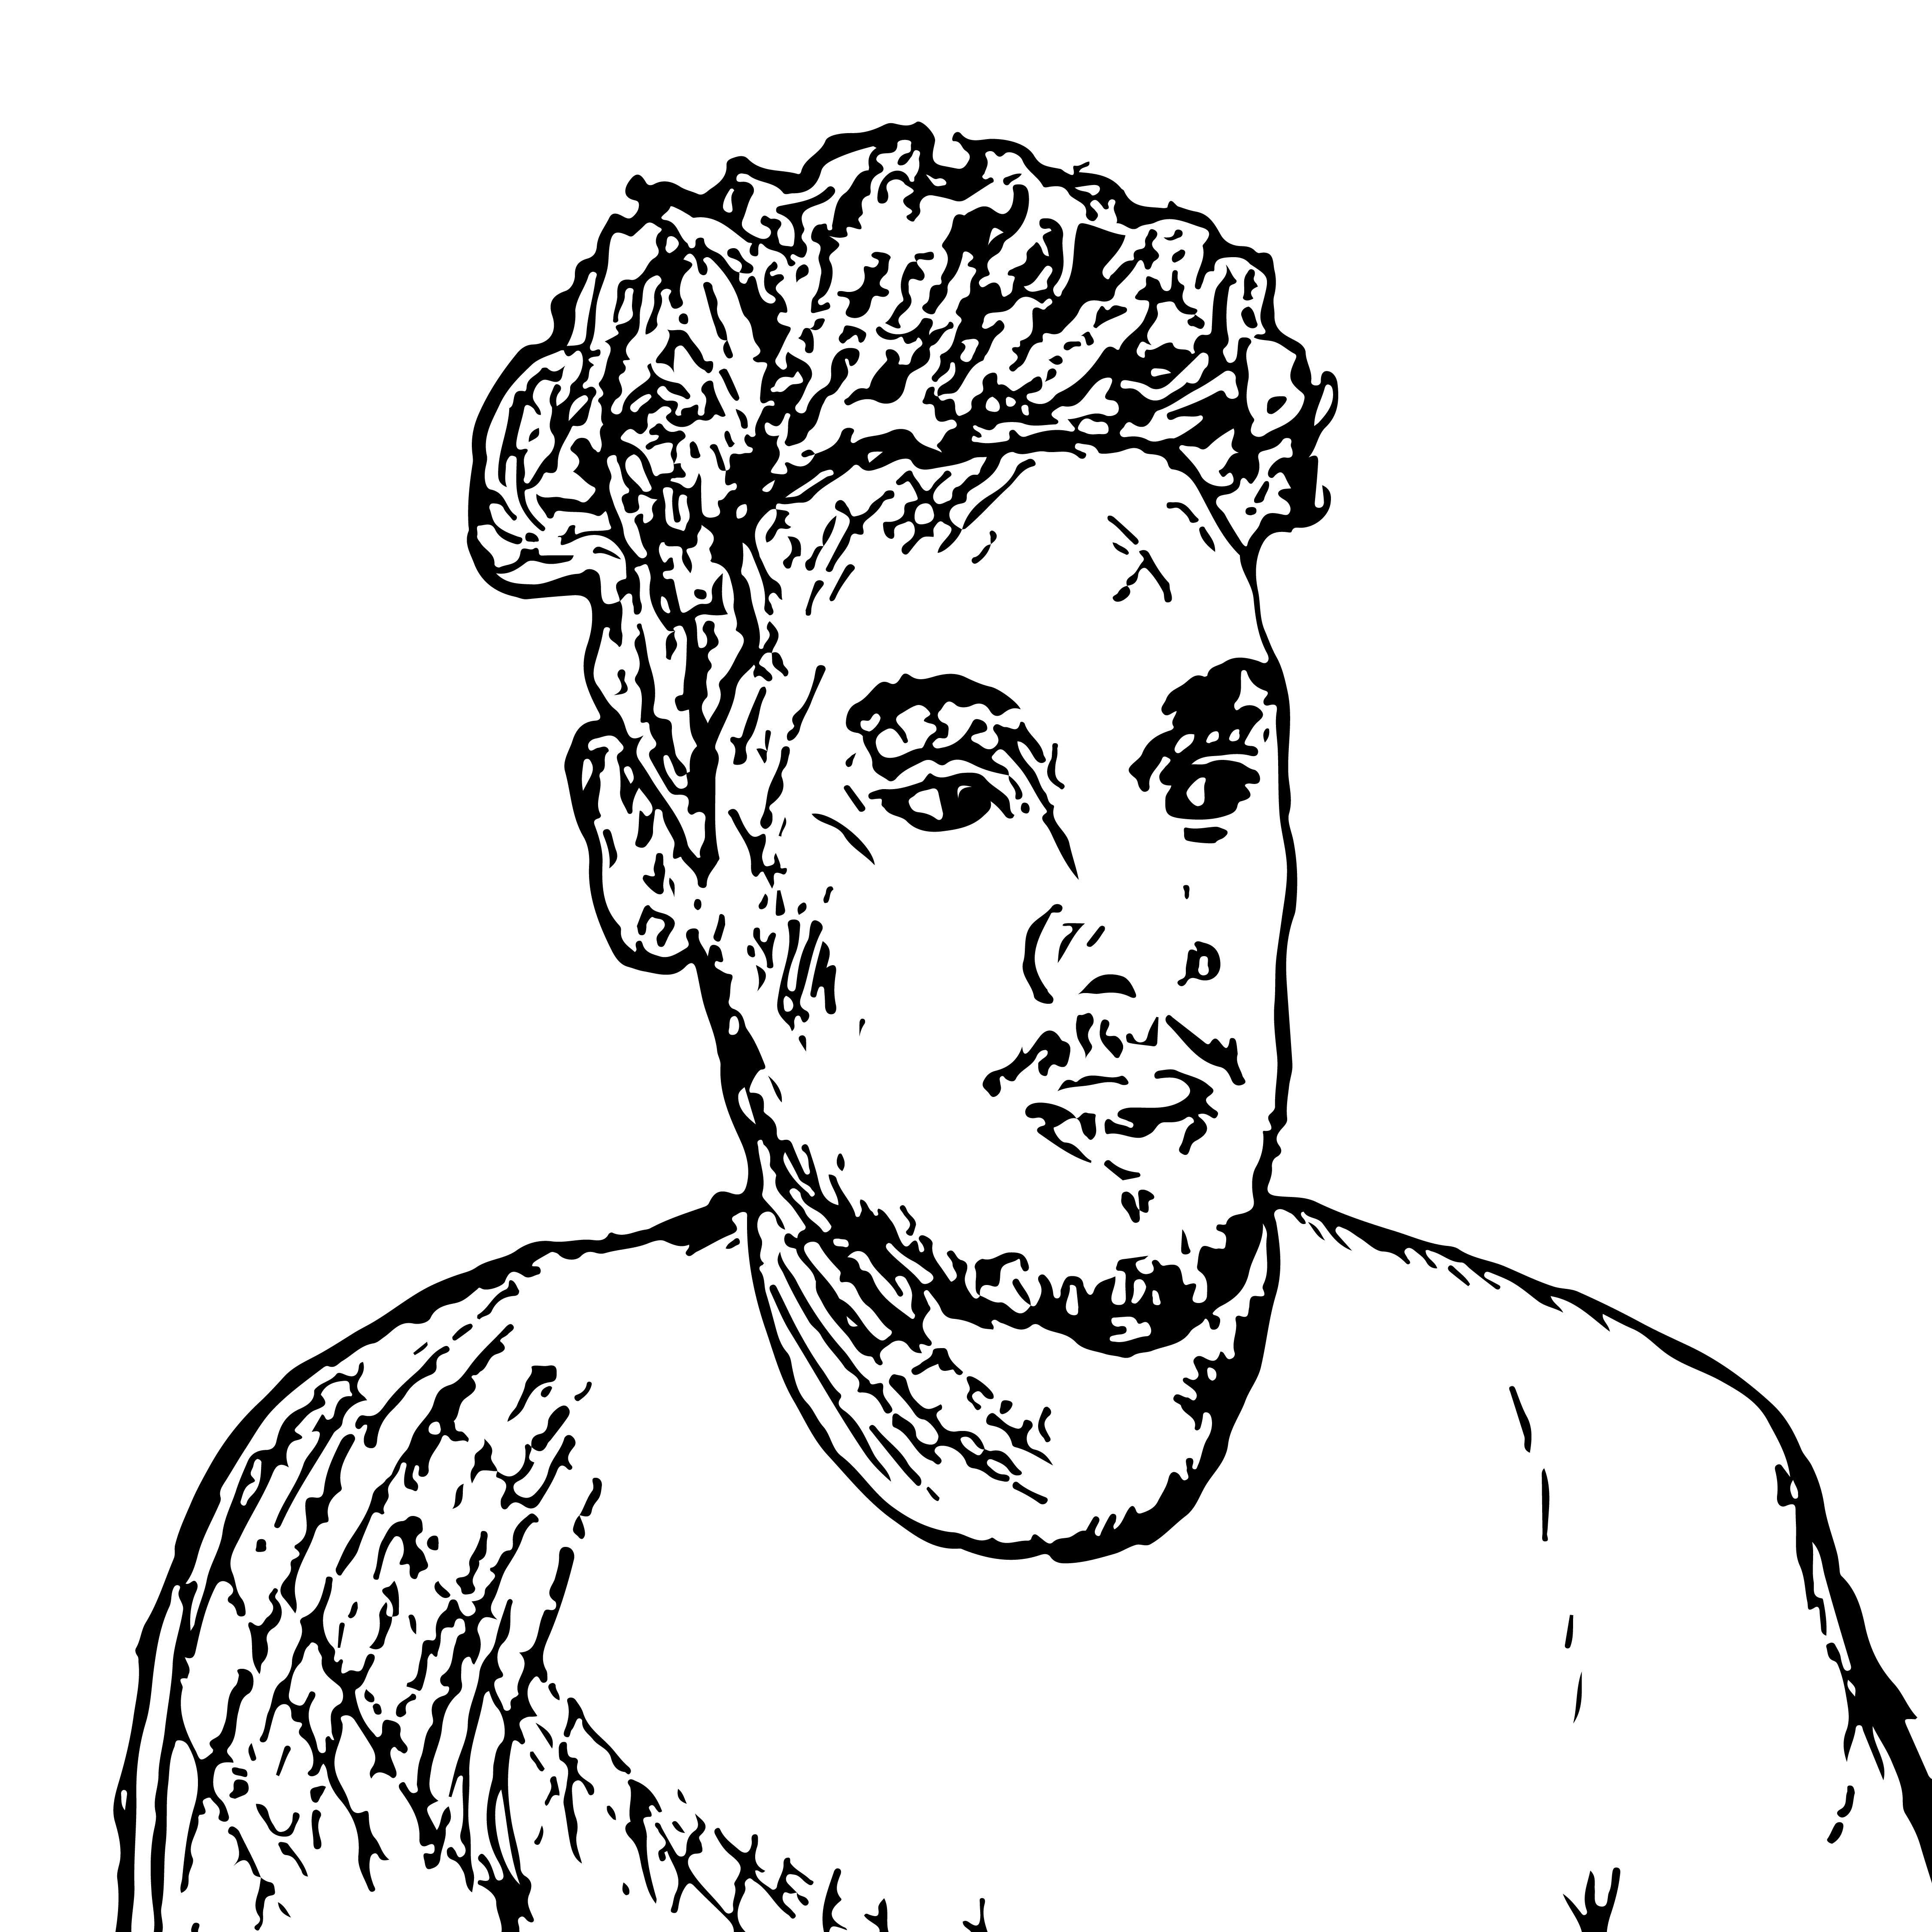 A drawing of a young Black man looking to the right.